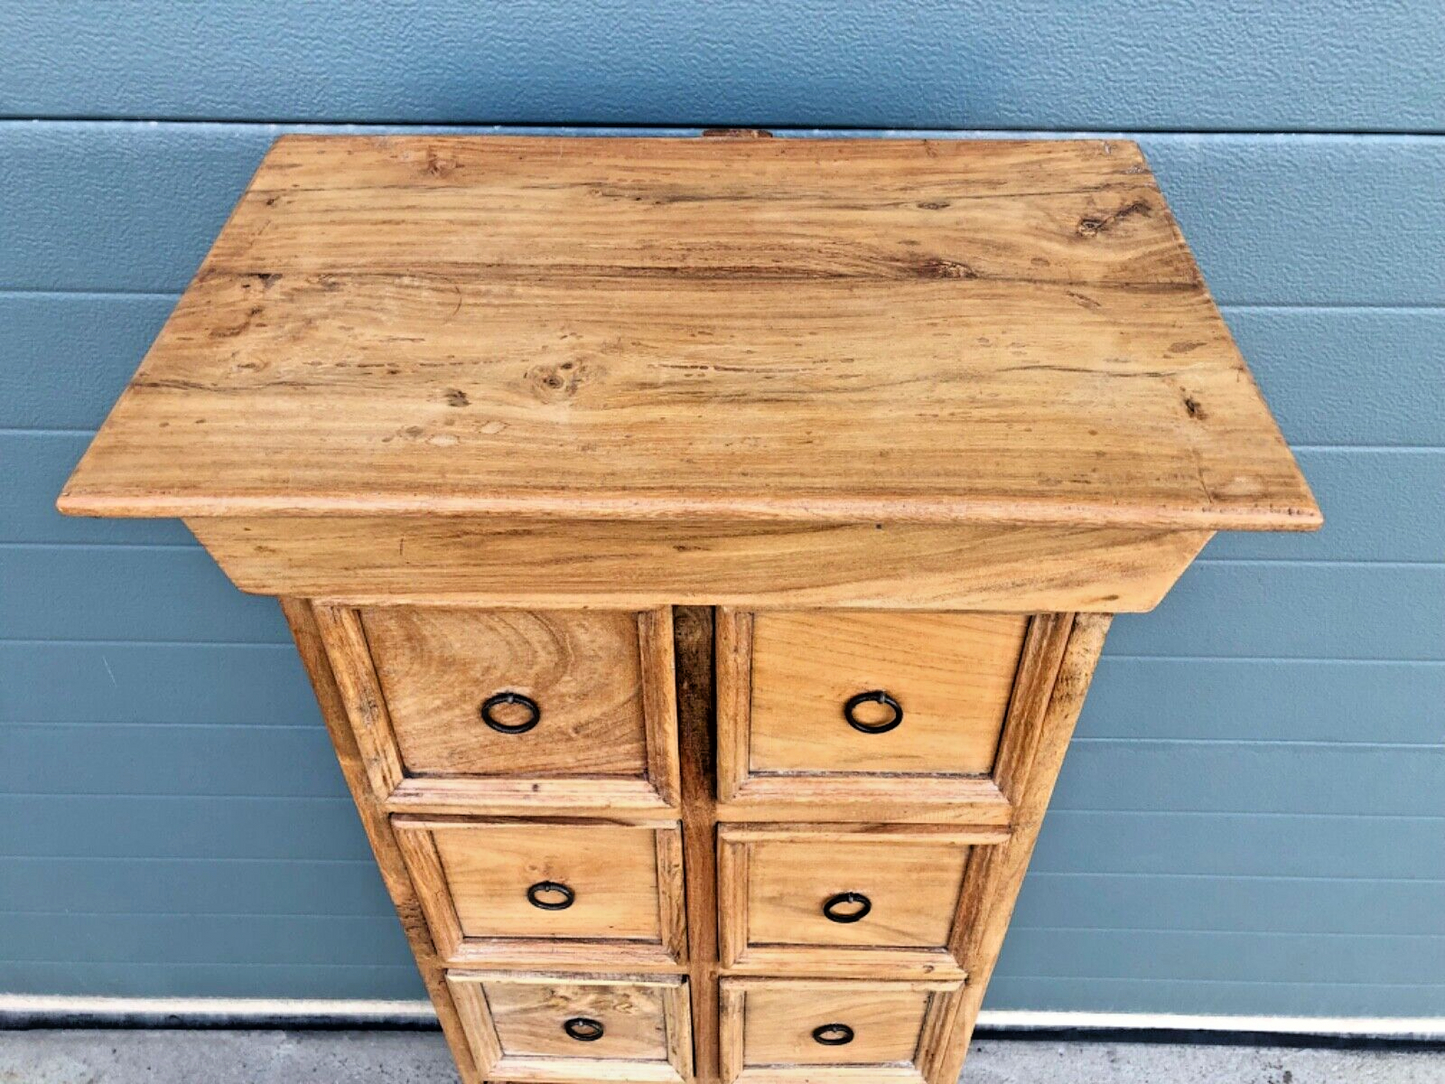 000800....Handsome Vintage Tall Chest Of Drawers / Spice Drawers ( sold )